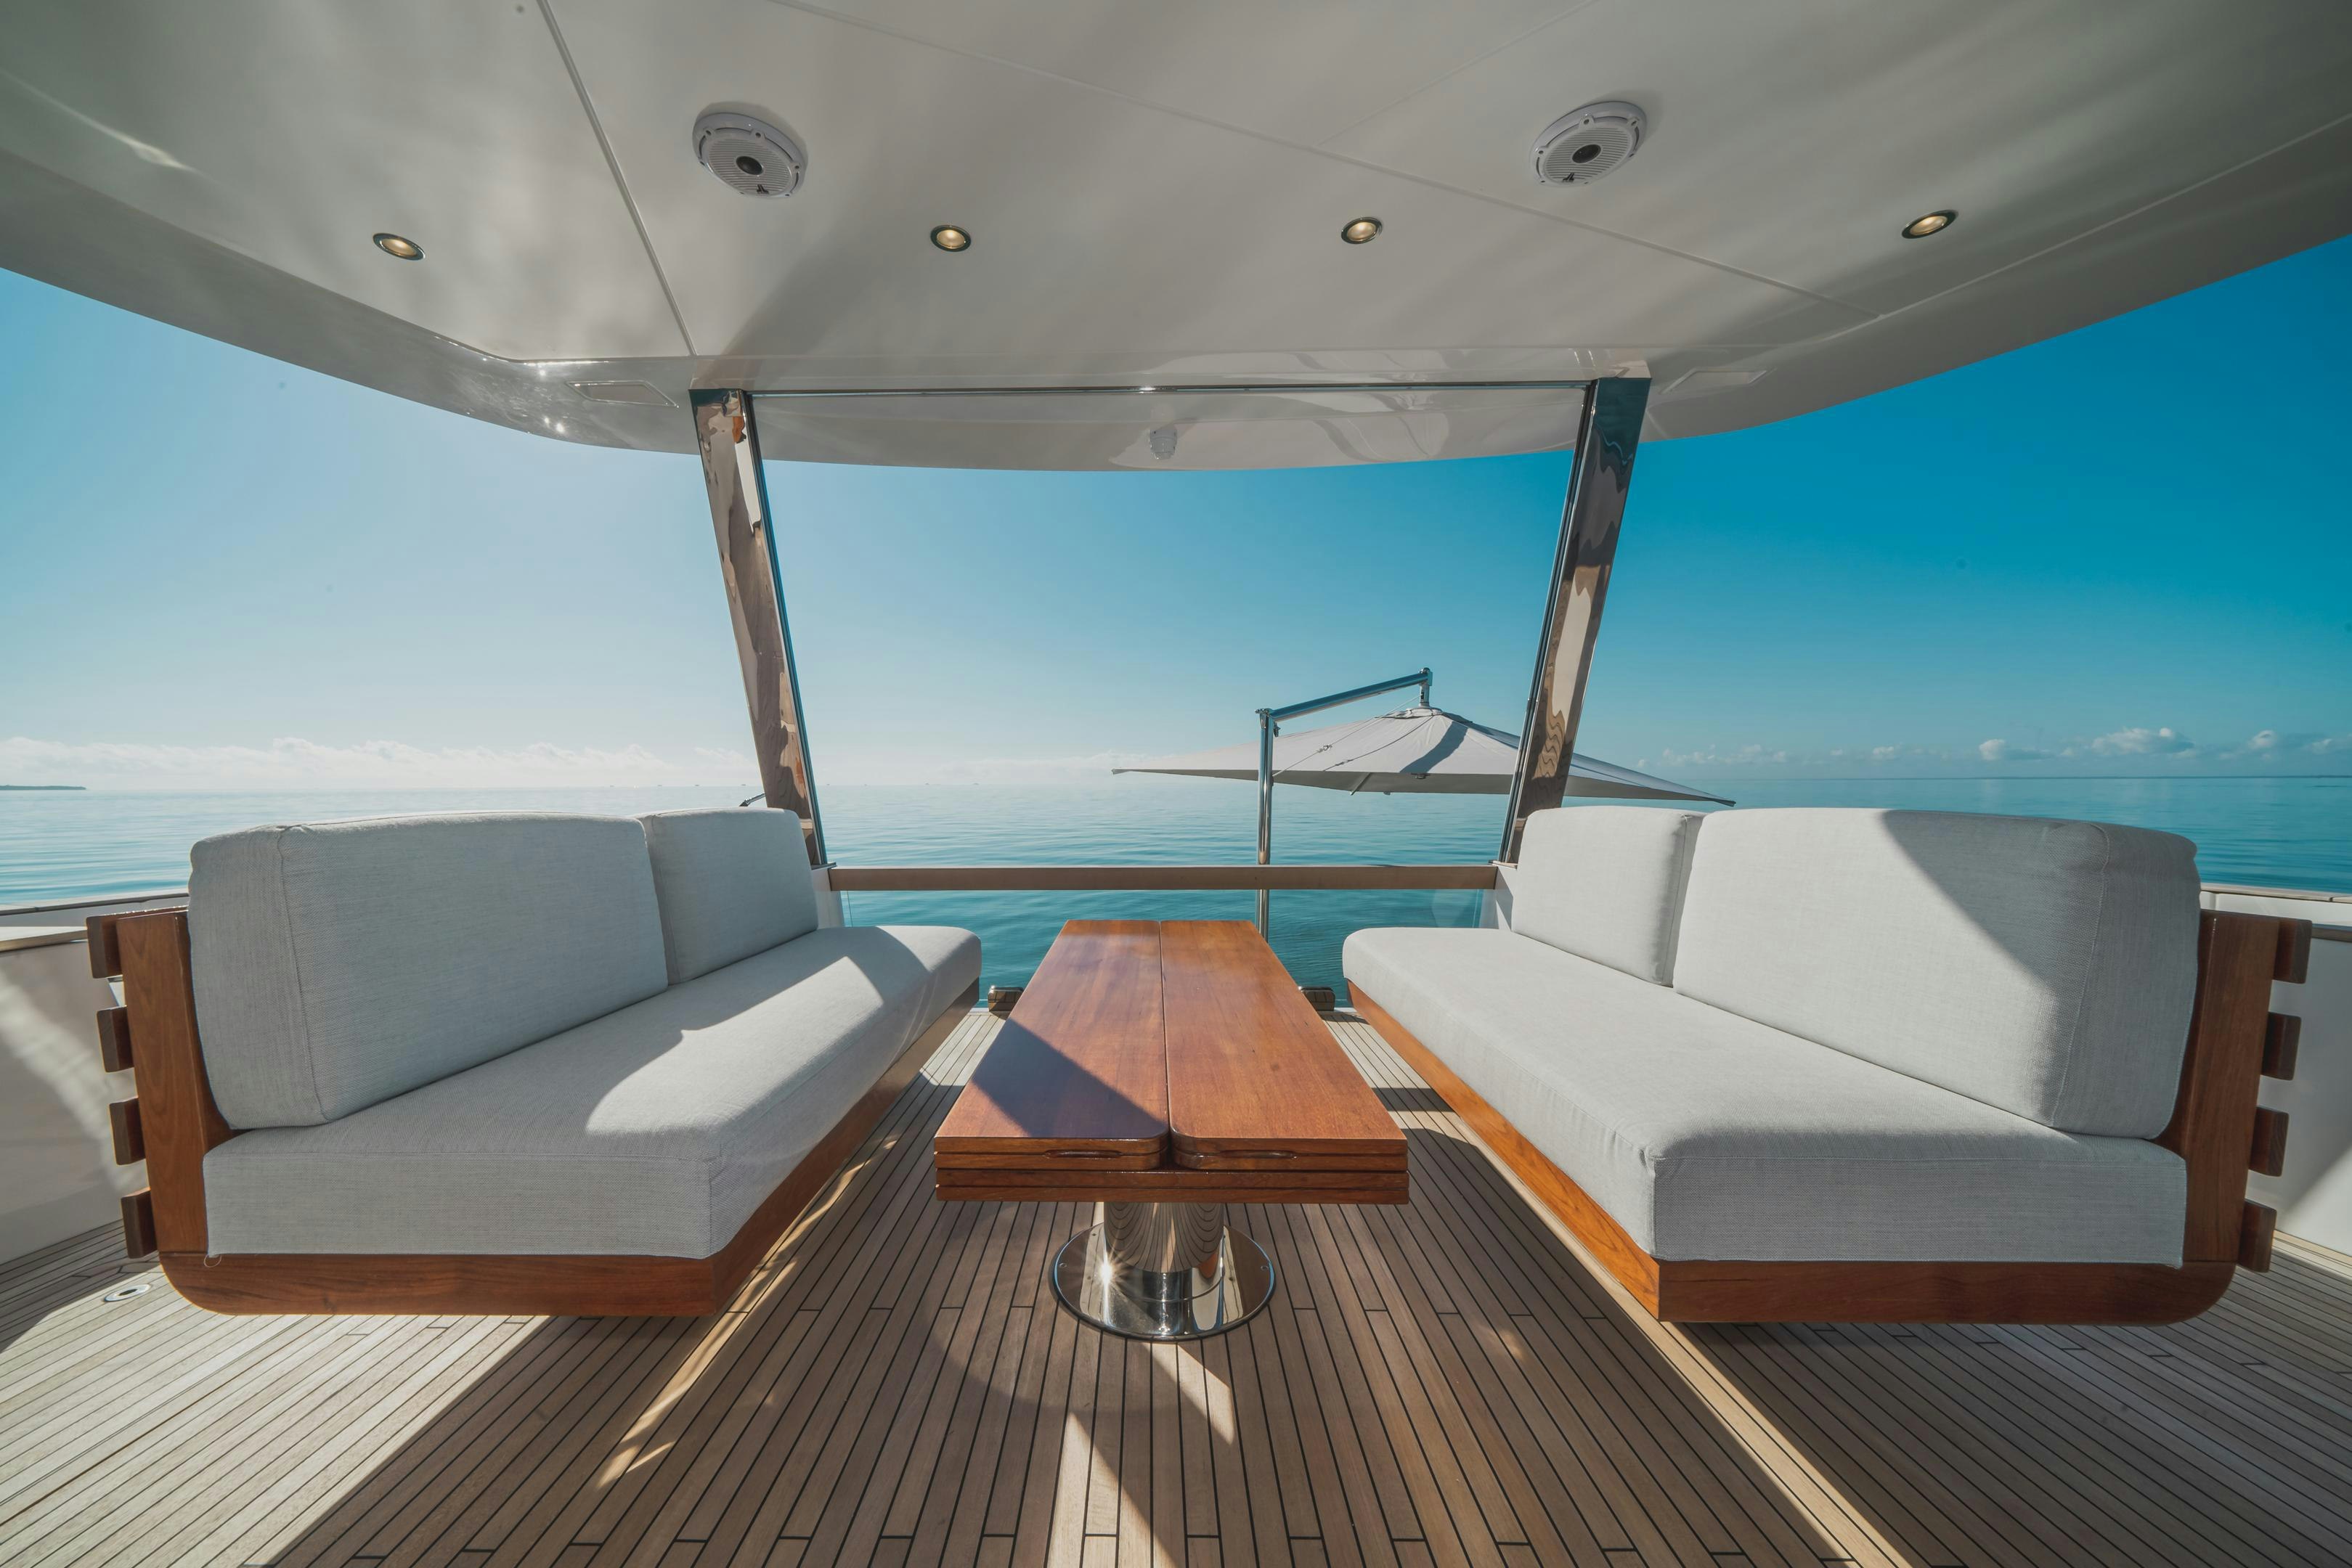 Seasonal Rates for GUBA TIMES Private Luxury Yacht For Charter